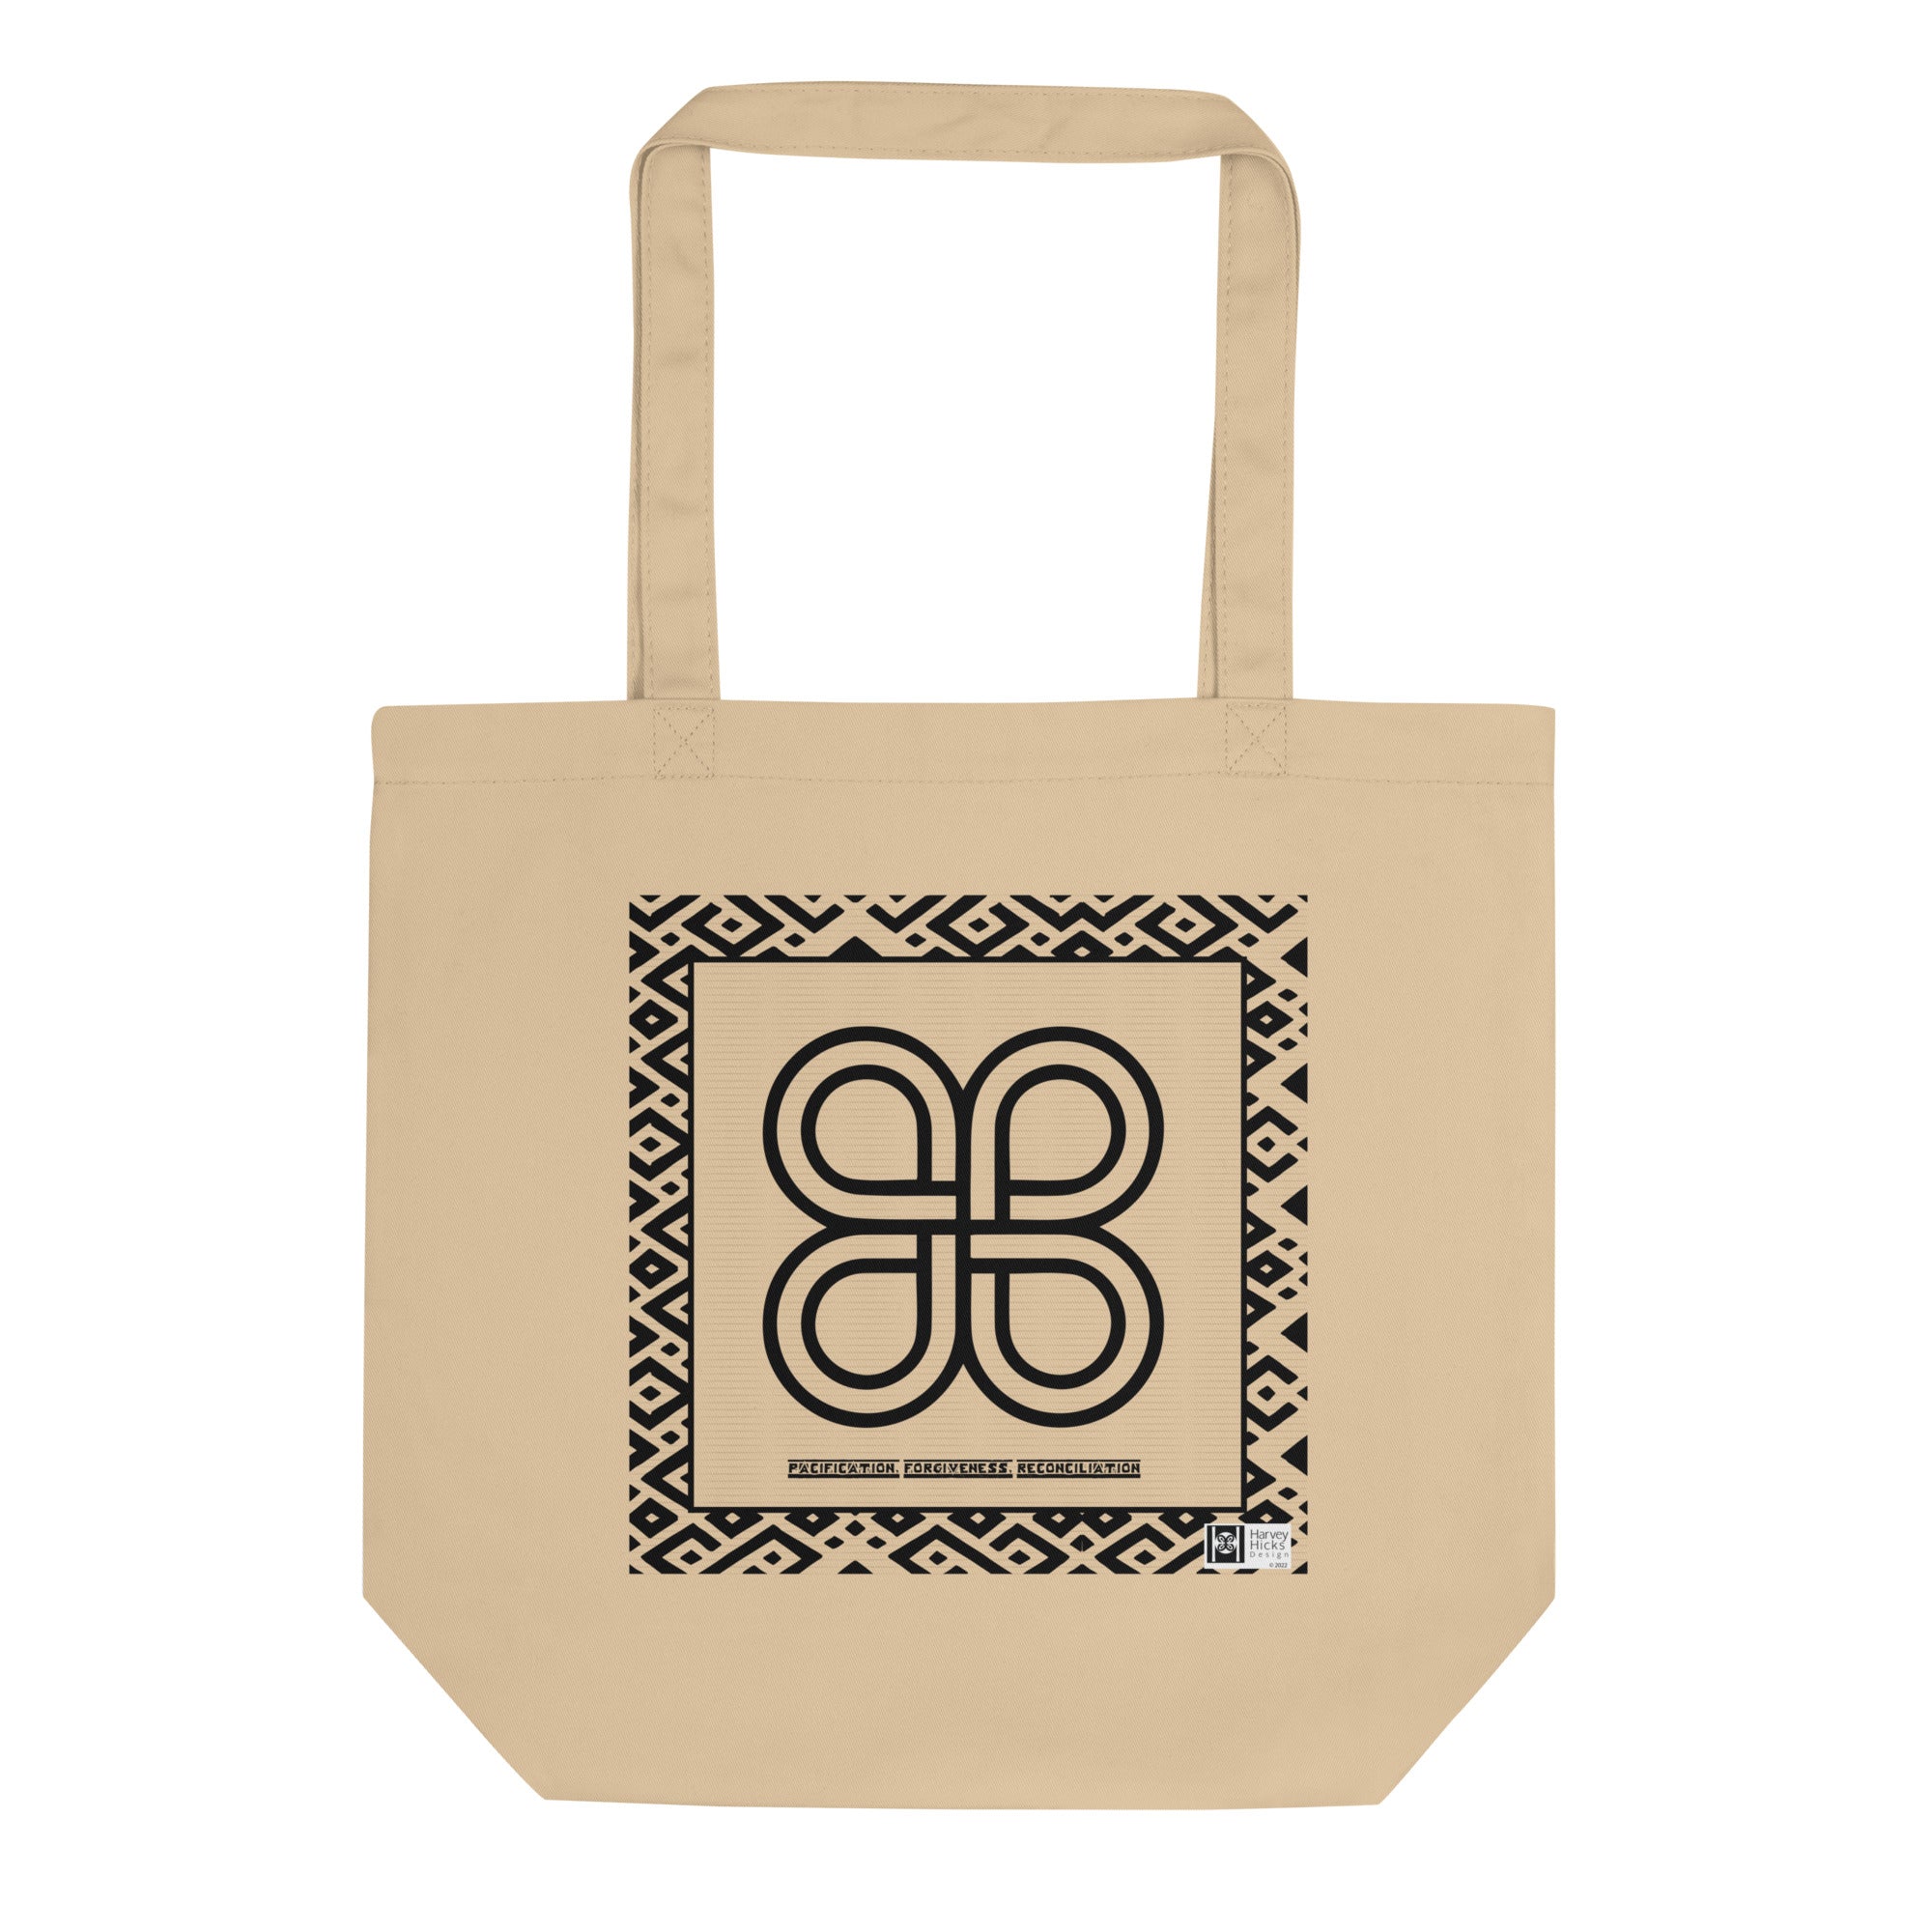 100% cotton Eco Tote Bag, featuring the Adinkra symbol for pacification